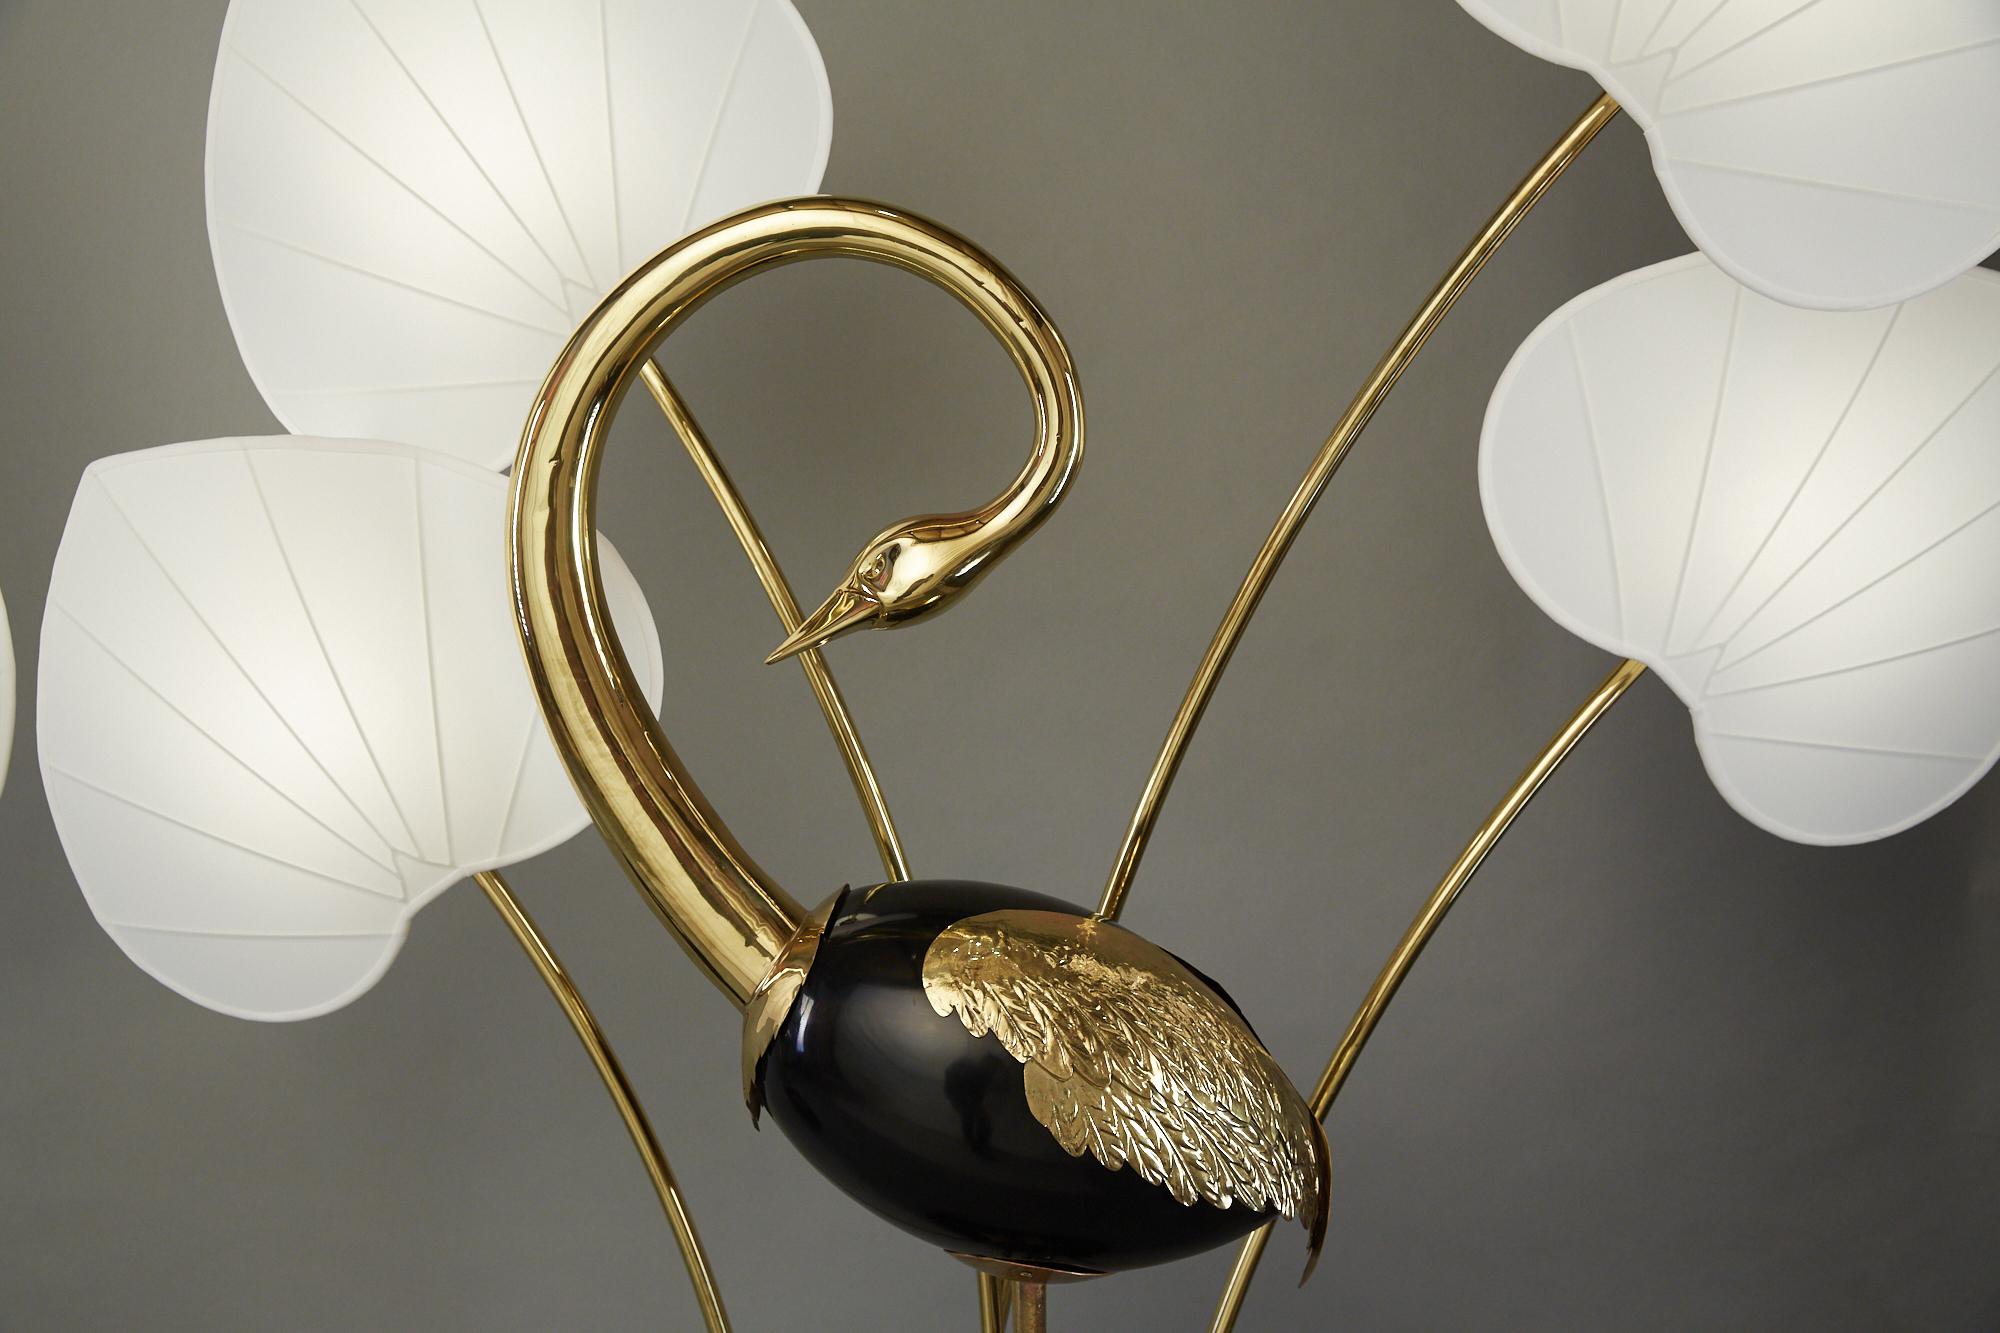 Lacquered Monumental Pair of Brass Standing Egret Floor Lamps by Antonio Pavia For Sale